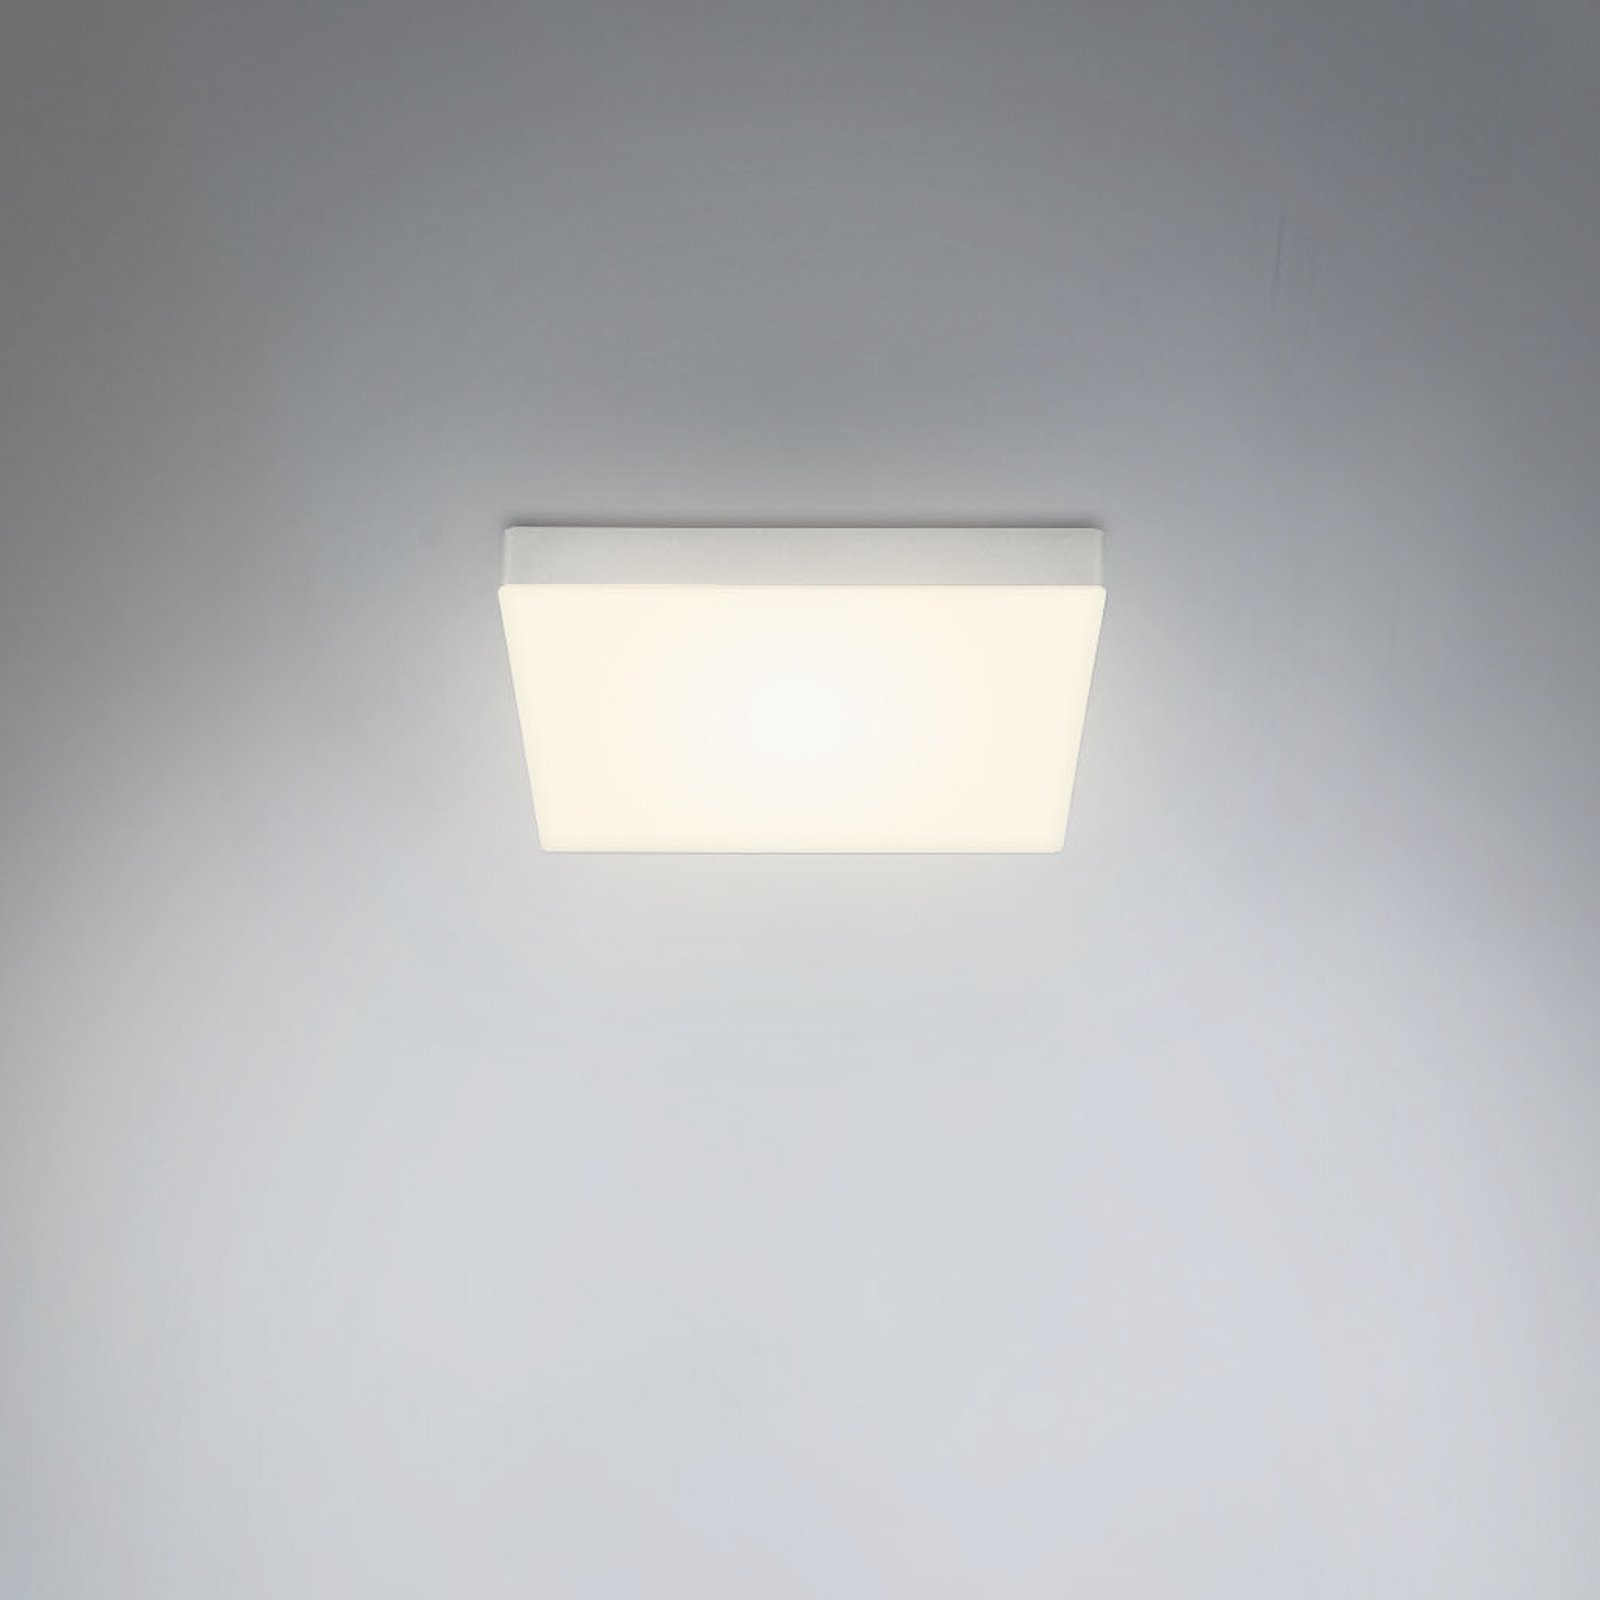 LED ceiling light Flame, 21.2 x 21.2 cm, silver